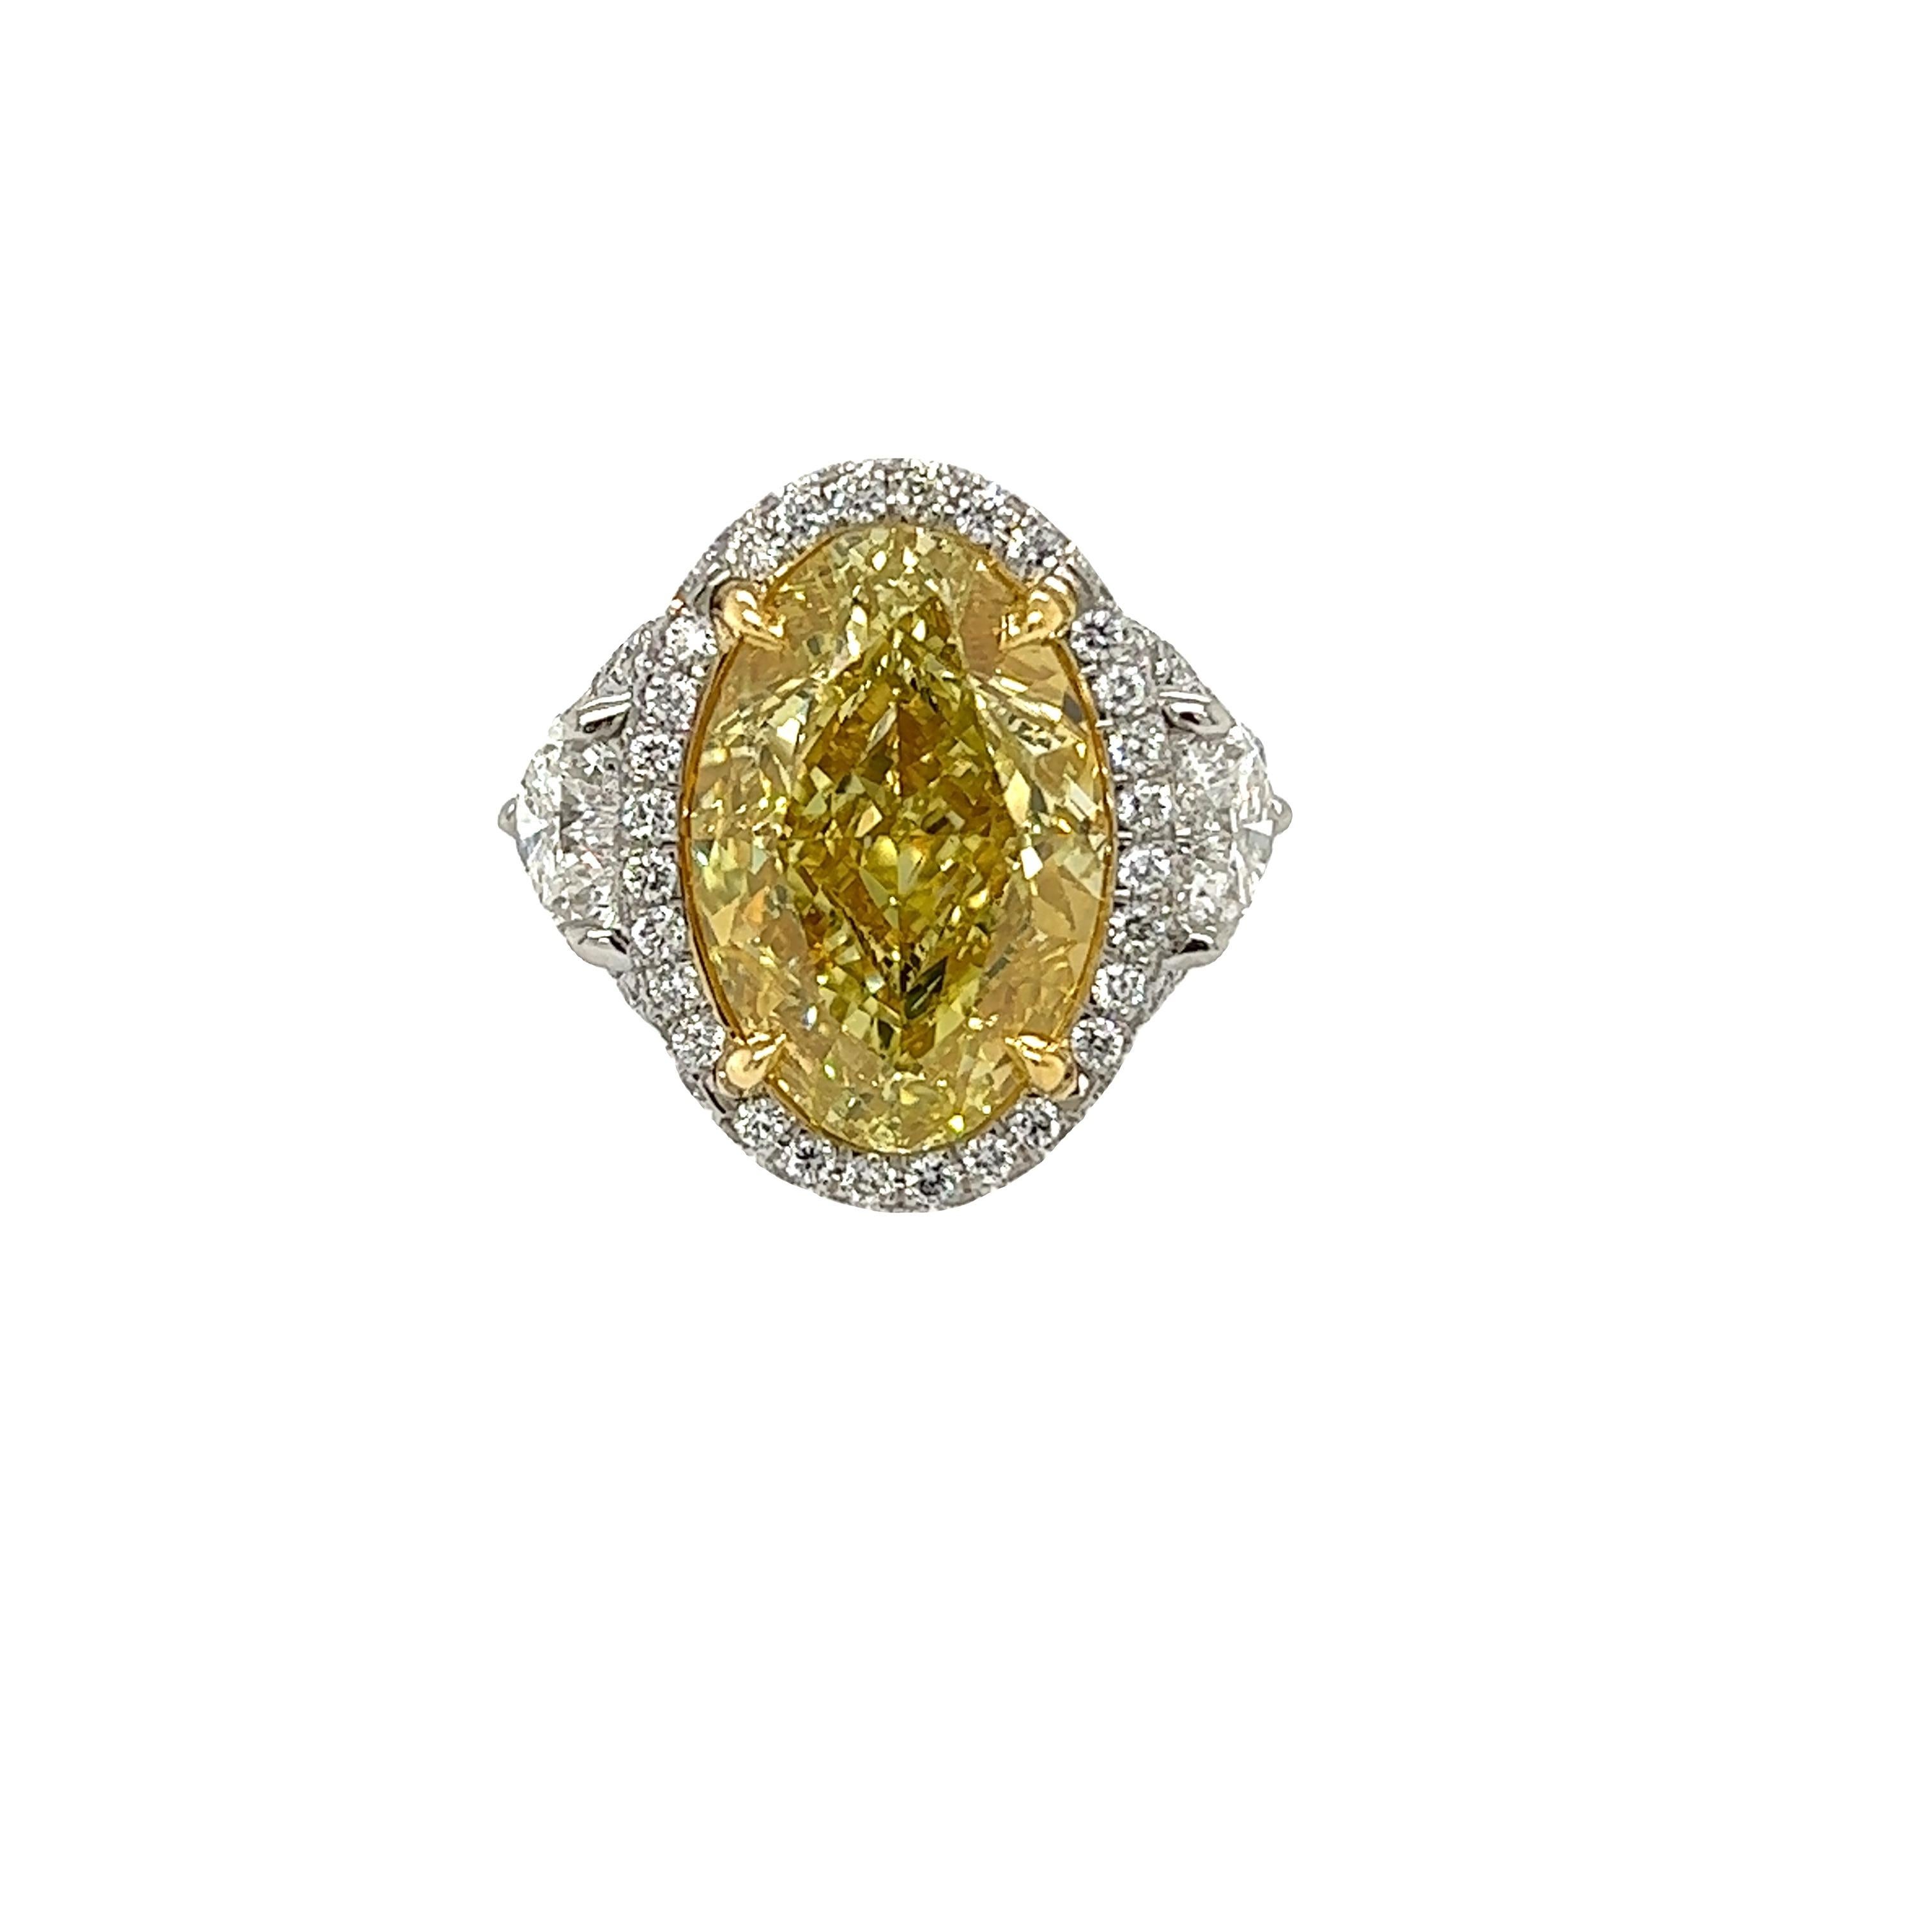 Rosenberg Diamonds & Co. 10.01 carat Oval Shape Fancy Yellow VS2 clarity is accompanied by a GIA certificate. This beautiful bright oval cut is set in a handmade platinum & 18k yellow gold setting with perfectly matched pair of heart shape side